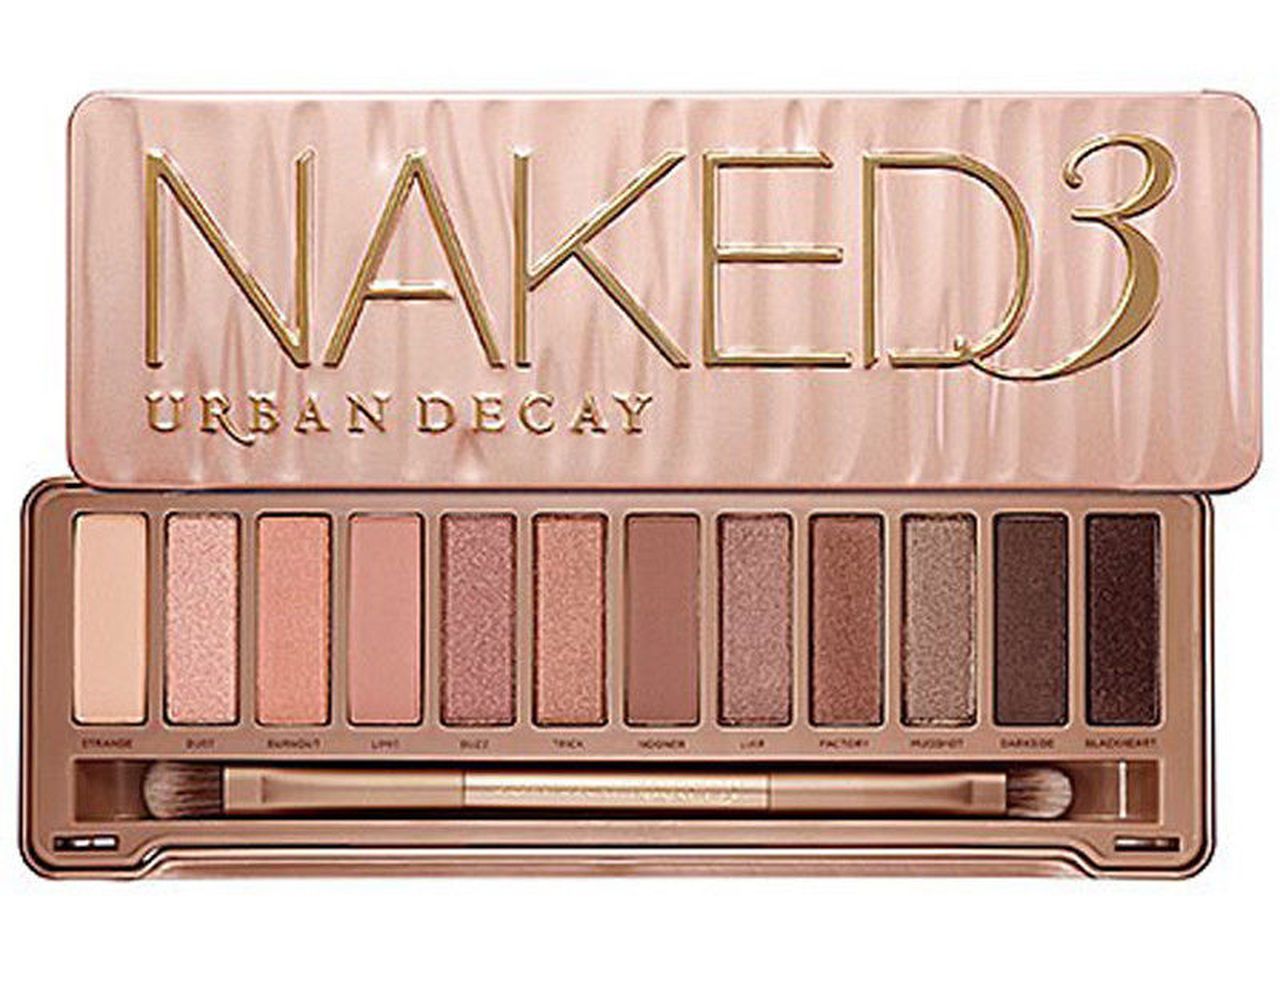  Bảng Phấn Mắt Urband Decay Naked 3 Eyeshadow Palette 